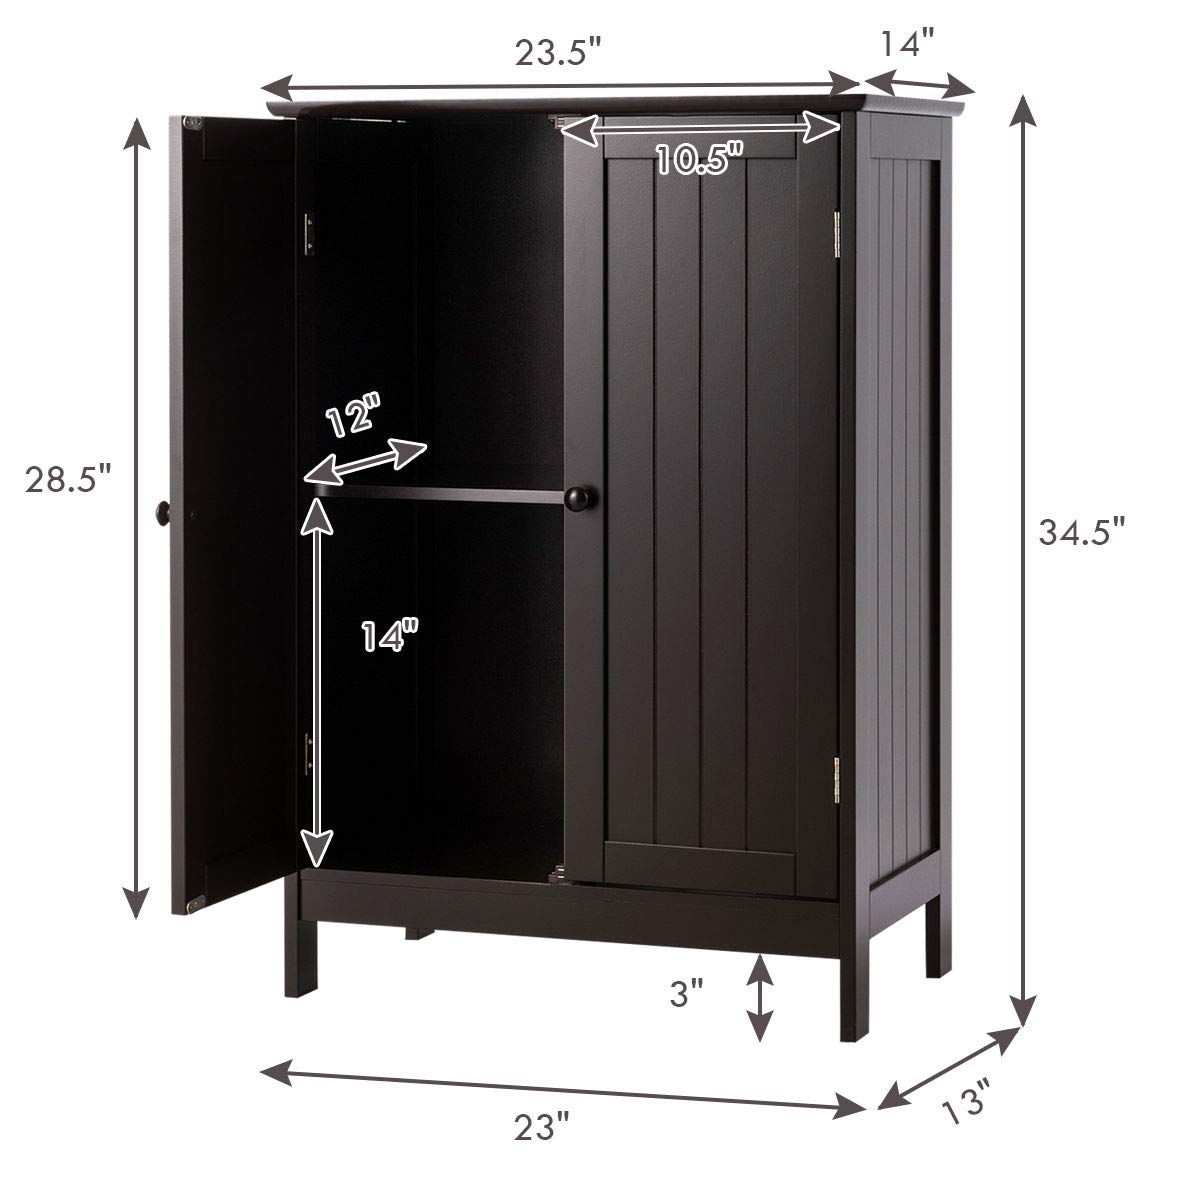 Giantex Storage Cabinet with Doors and Shelves - Freestanding Storage Organizer with Anti-Tipping Device